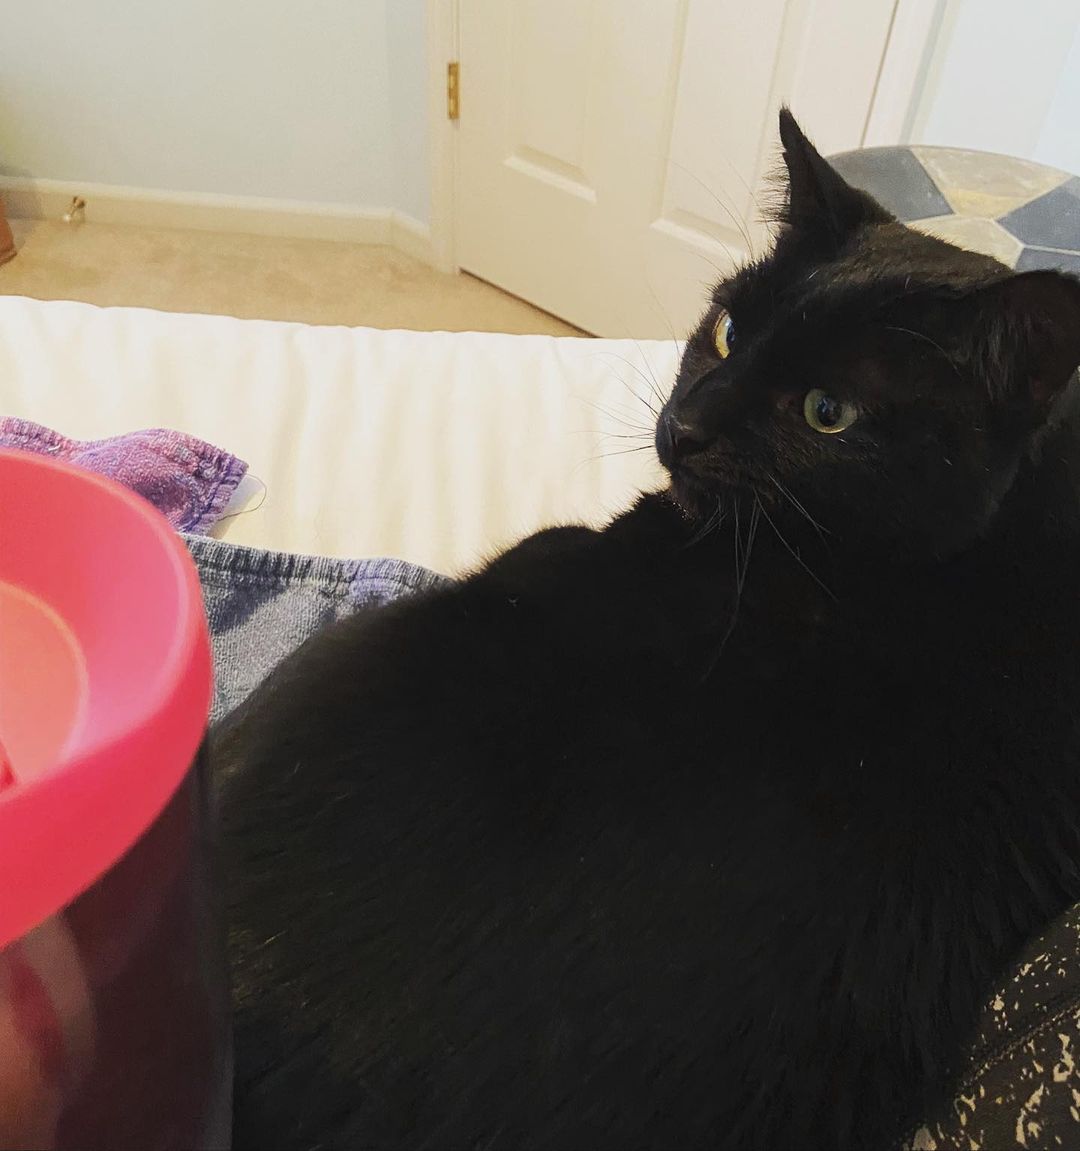 Good morning! ☀️ Starting our Monday off announcing that Binx went to his forever home this weekend! 🥳 He is obviously the most content kitty with his new forever family. ❤️

<a target='_blank' href='https://www.instagram.com/explore/tags/cherrylandhumanesociety/'>#cherrylandhumanesociety</a> <a target='_blank' href='https://www.instagram.com/explore/tags/adoptcherryland/'>#adoptcherryland</a> <a target='_blank' href='https://www.instagram.com/explore/tags/adoptdontshop/'>#adoptdontshop</a> <a target='_blank' href='https://www.instagram.com/explore/tags/catsofinstagram/'>#catsofinstagram</a> <a target='_blank' href='https://www.instagram.com/explore/tags/foreverhome/'>#foreverhome</a> <a target='_blank' href='https://www.instagram.com/explore/tags/happycat/'>#happycat</a> <a target='_blank' href='https://www.instagram.com/explore/tags/happycatclub/'>#happycatclub</a> <a target='_blank' href='https://www.instagram.com/explore/tags/adoptedcat/'>#adoptedcat</a> <a target='_blank' href='https://www.instagram.com/explore/tags/family/'>#family</a> <a target='_blank' href='https://www.instagram.com/explore/tags/kiddos/'>#kiddos</a>